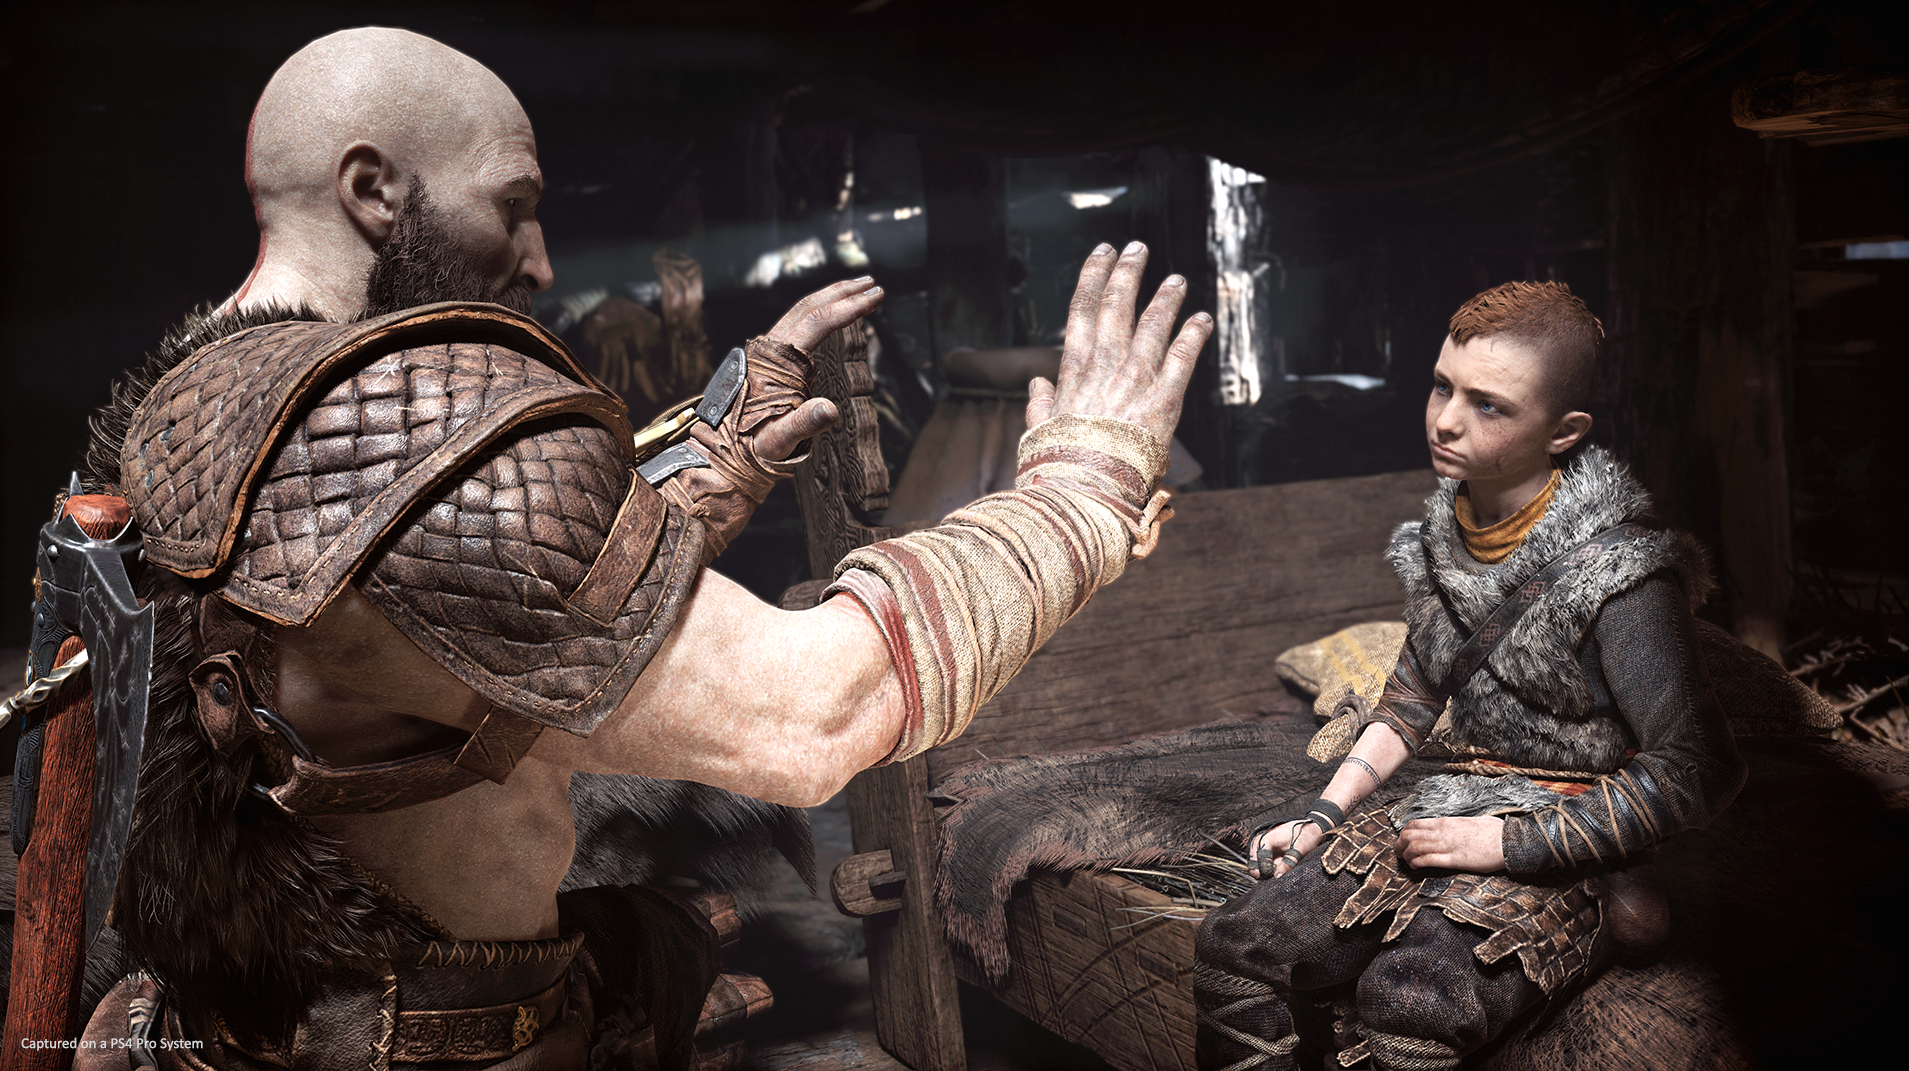 Kratos went from brainless thugs to a real big daddy